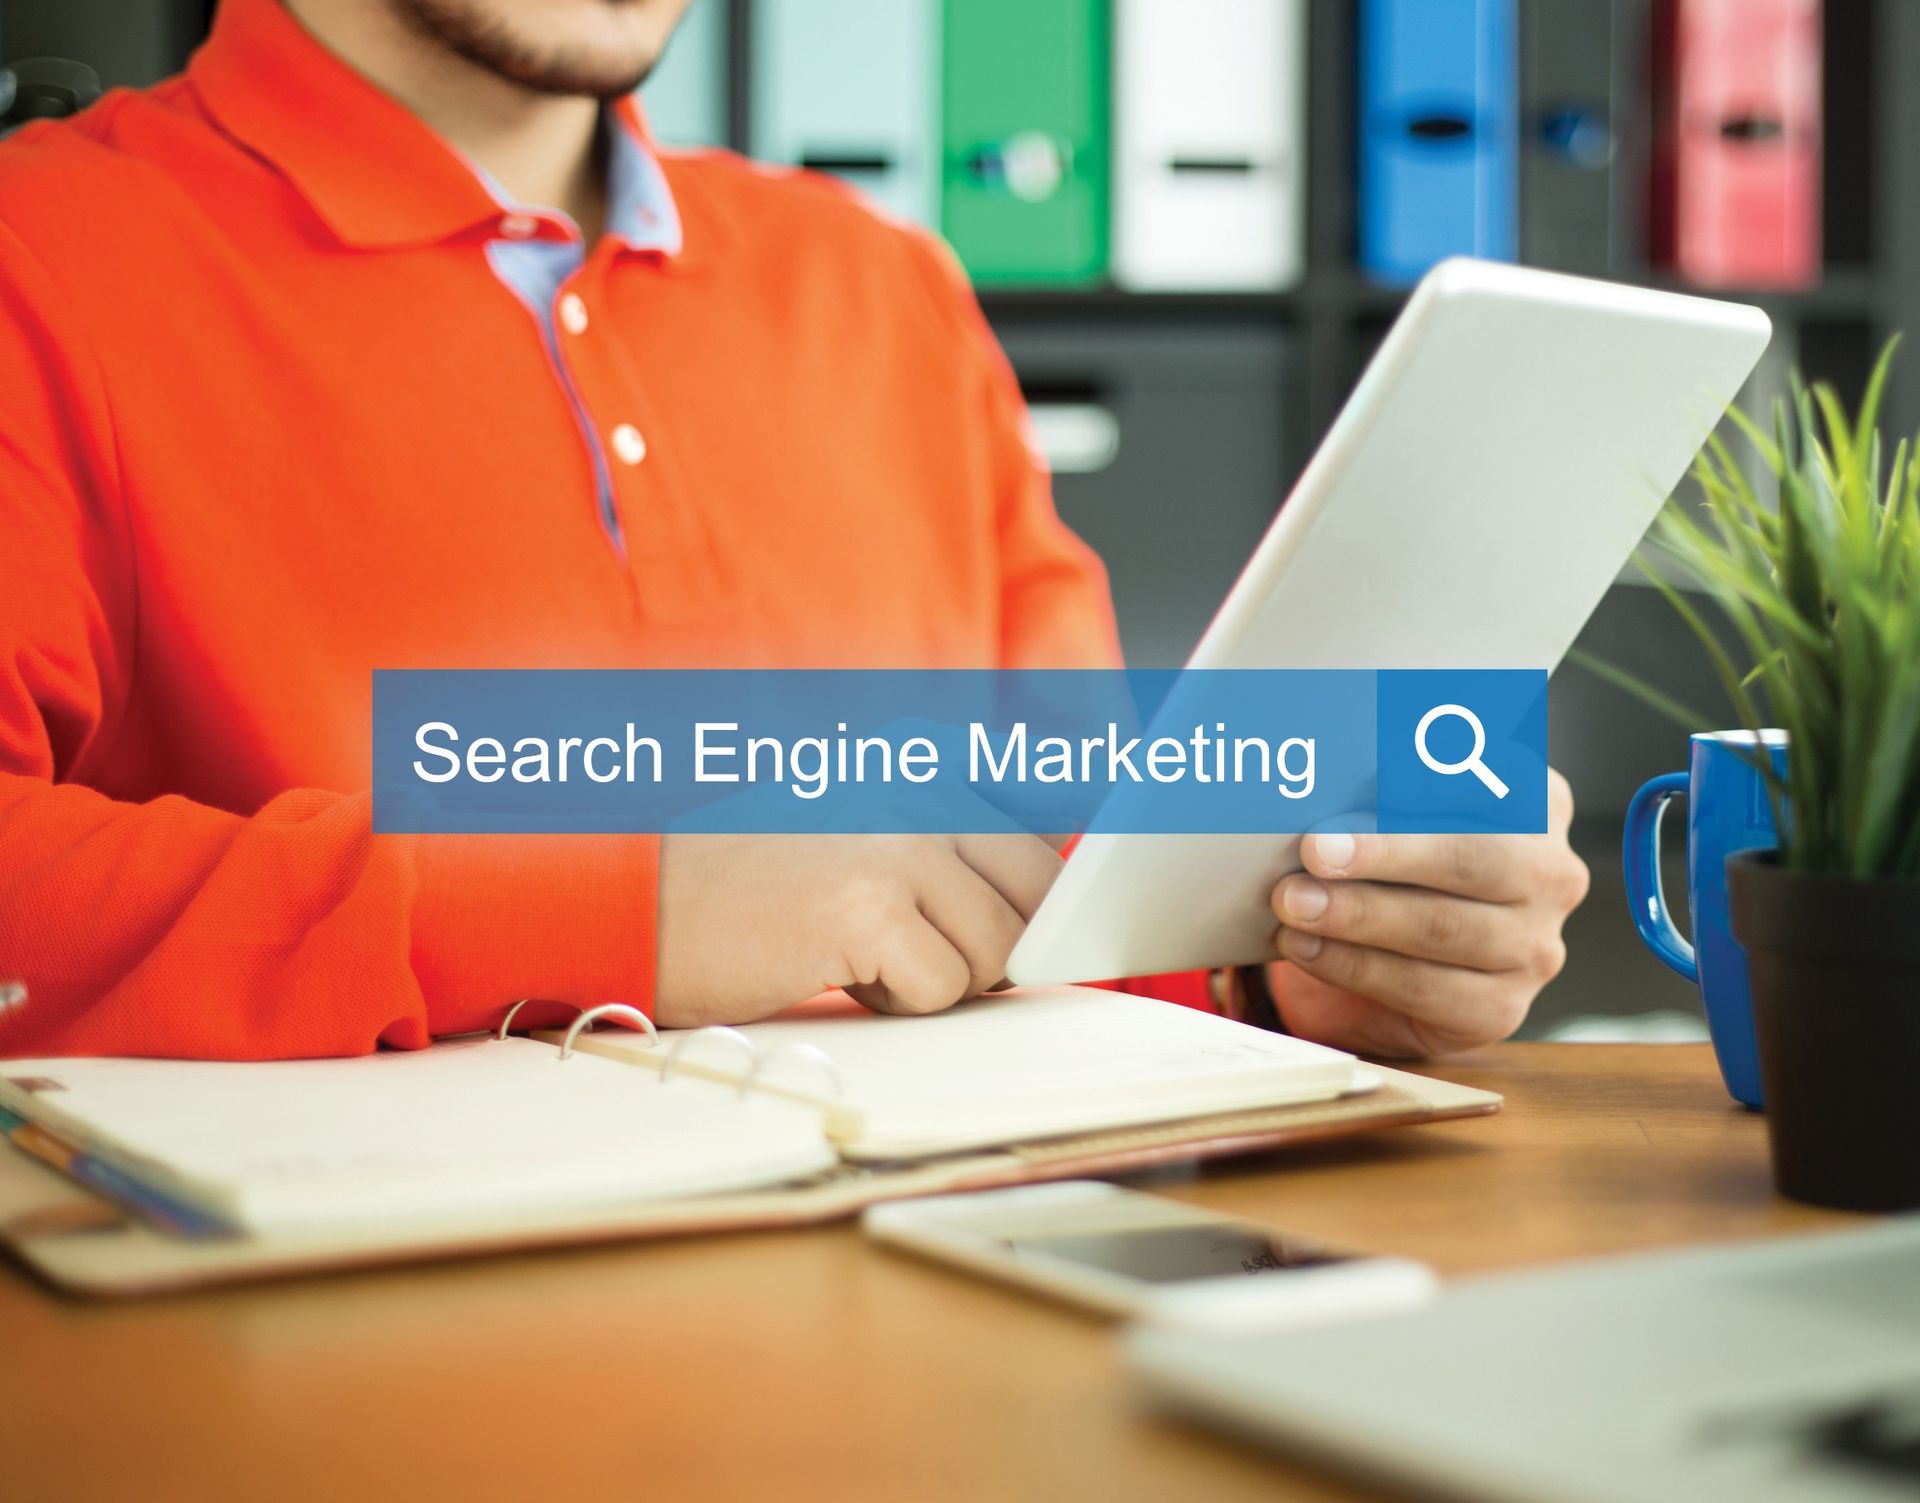 Search Engine Marketing (SEM): How to Do It Right